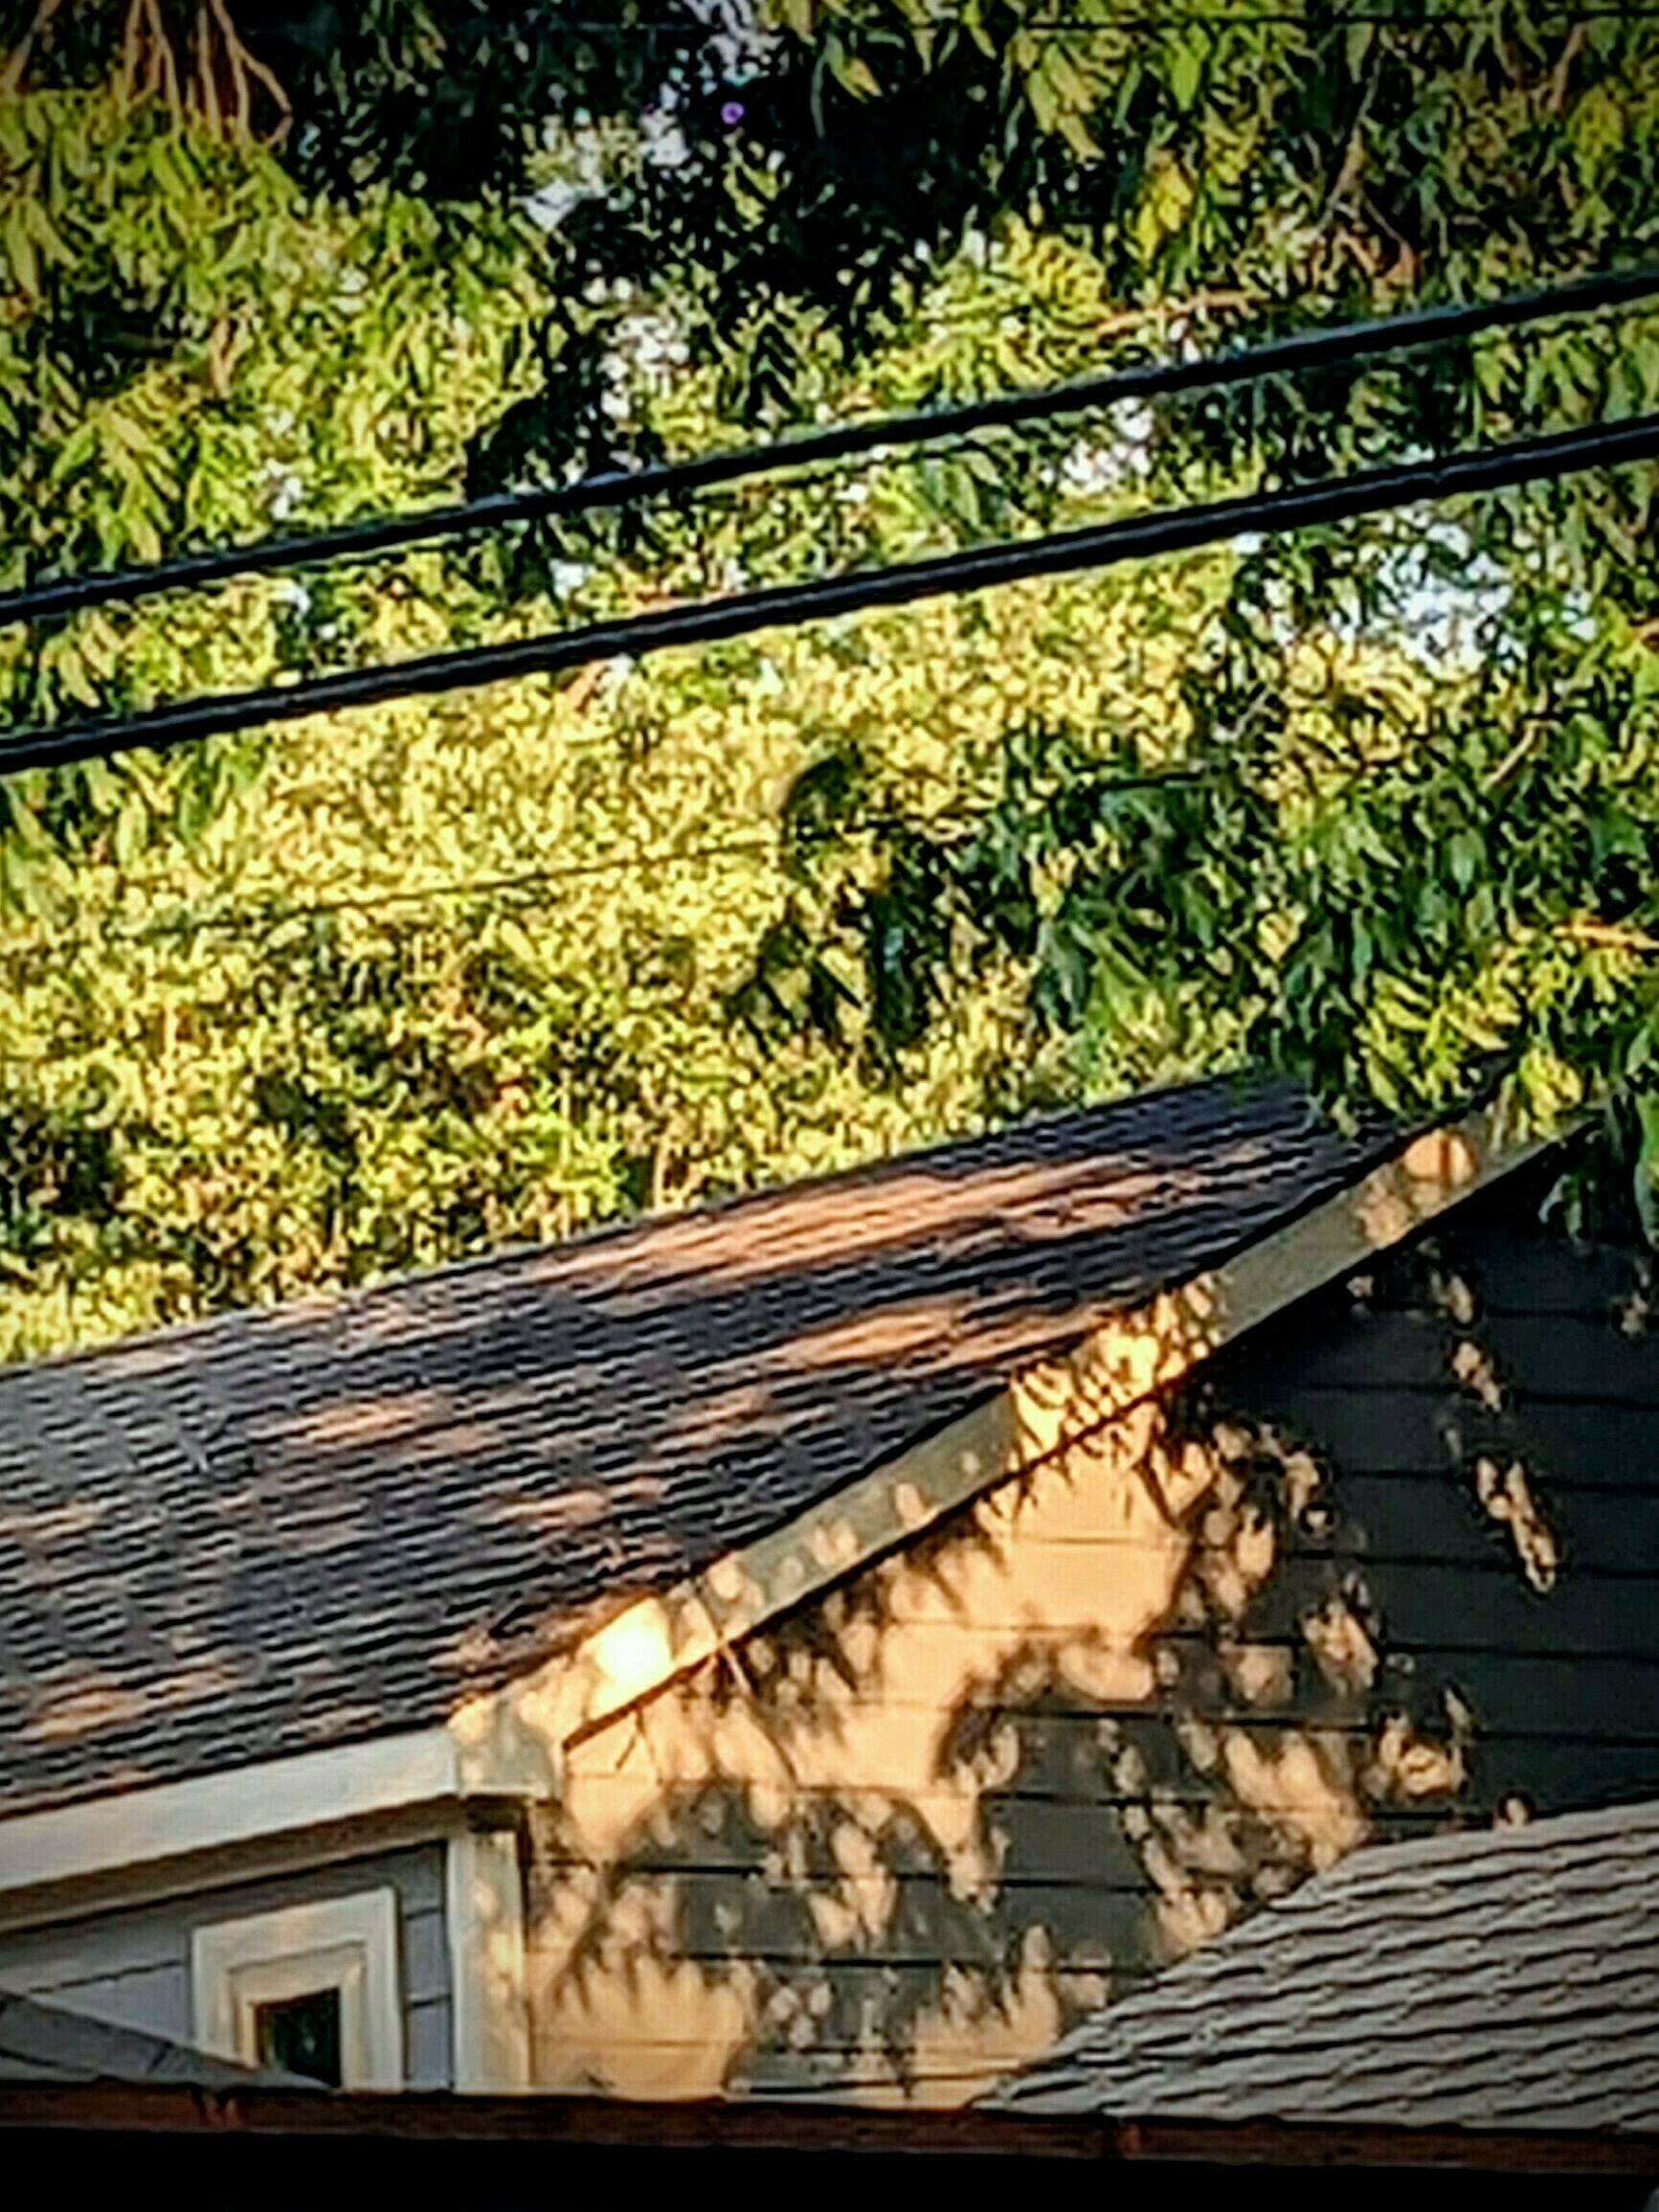 Shadows of trees against the side of a garage.